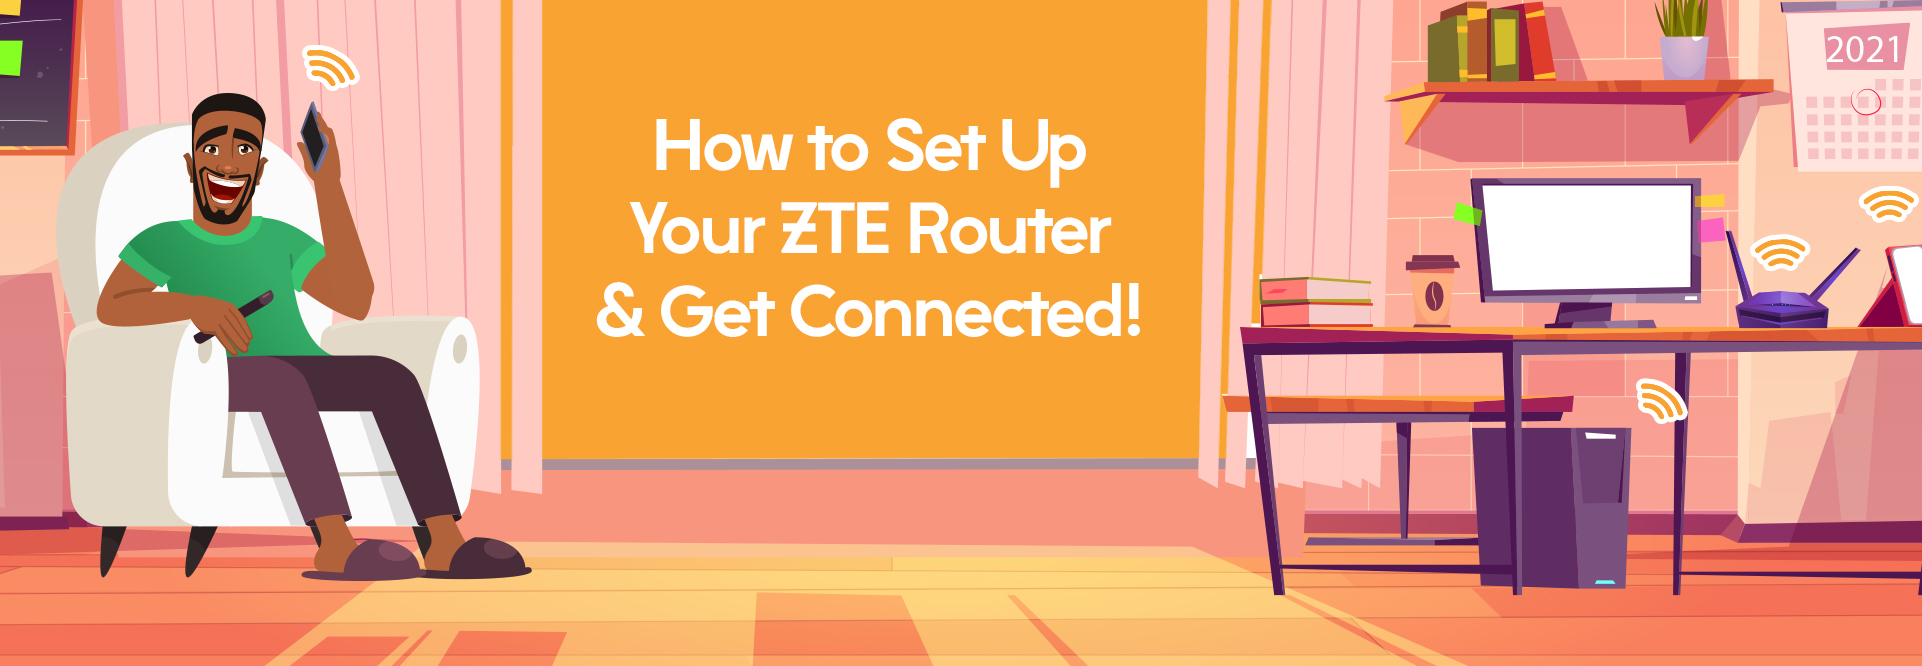 How to Set Up Your ZTE Router